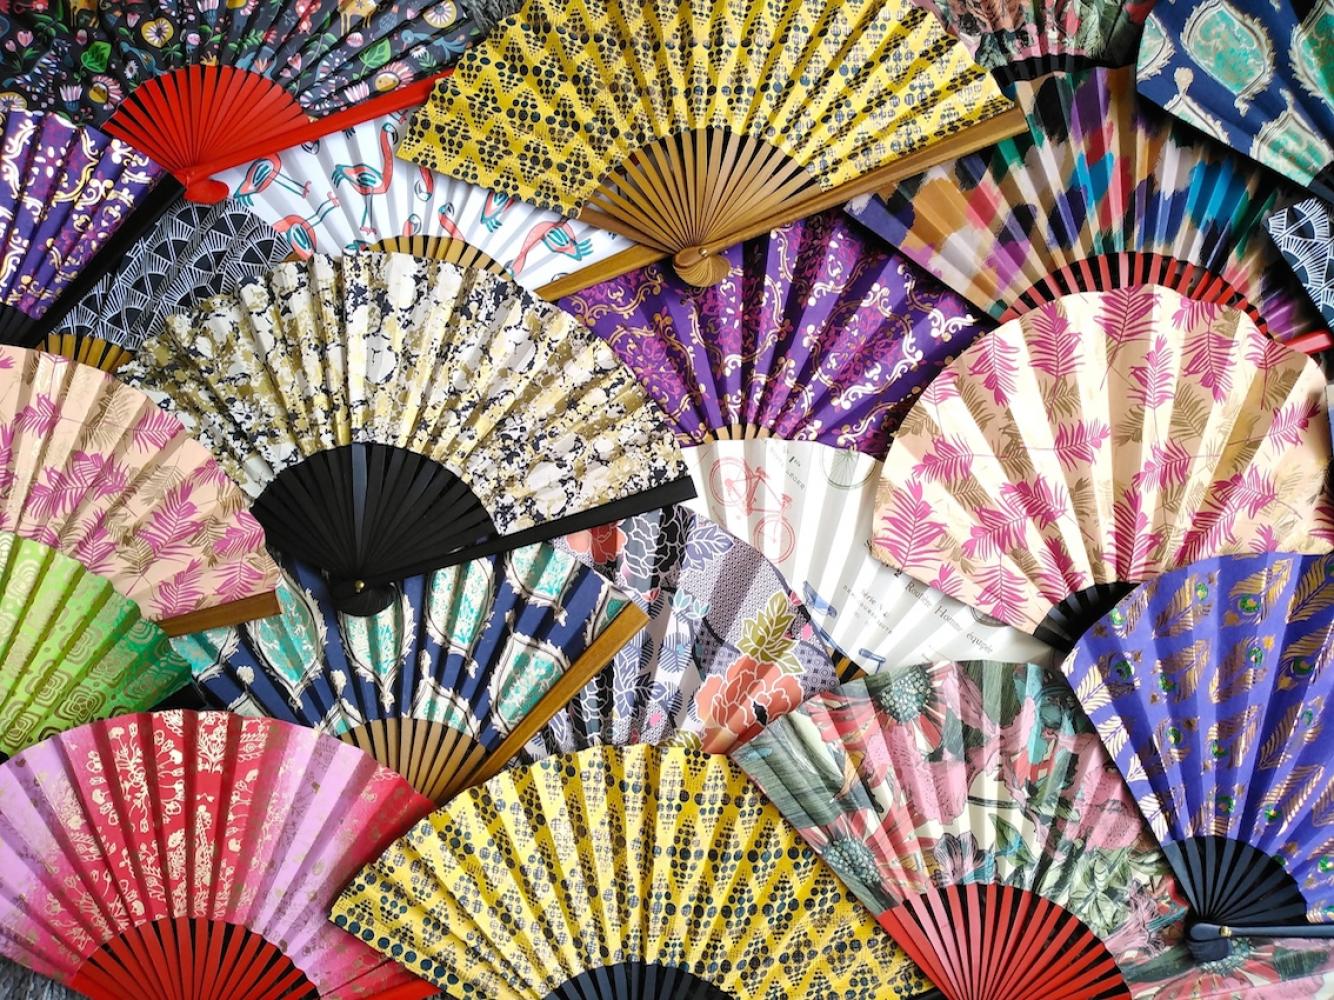 A colorful selection of some 'Hand-Held Folding Fans Victoria has made.